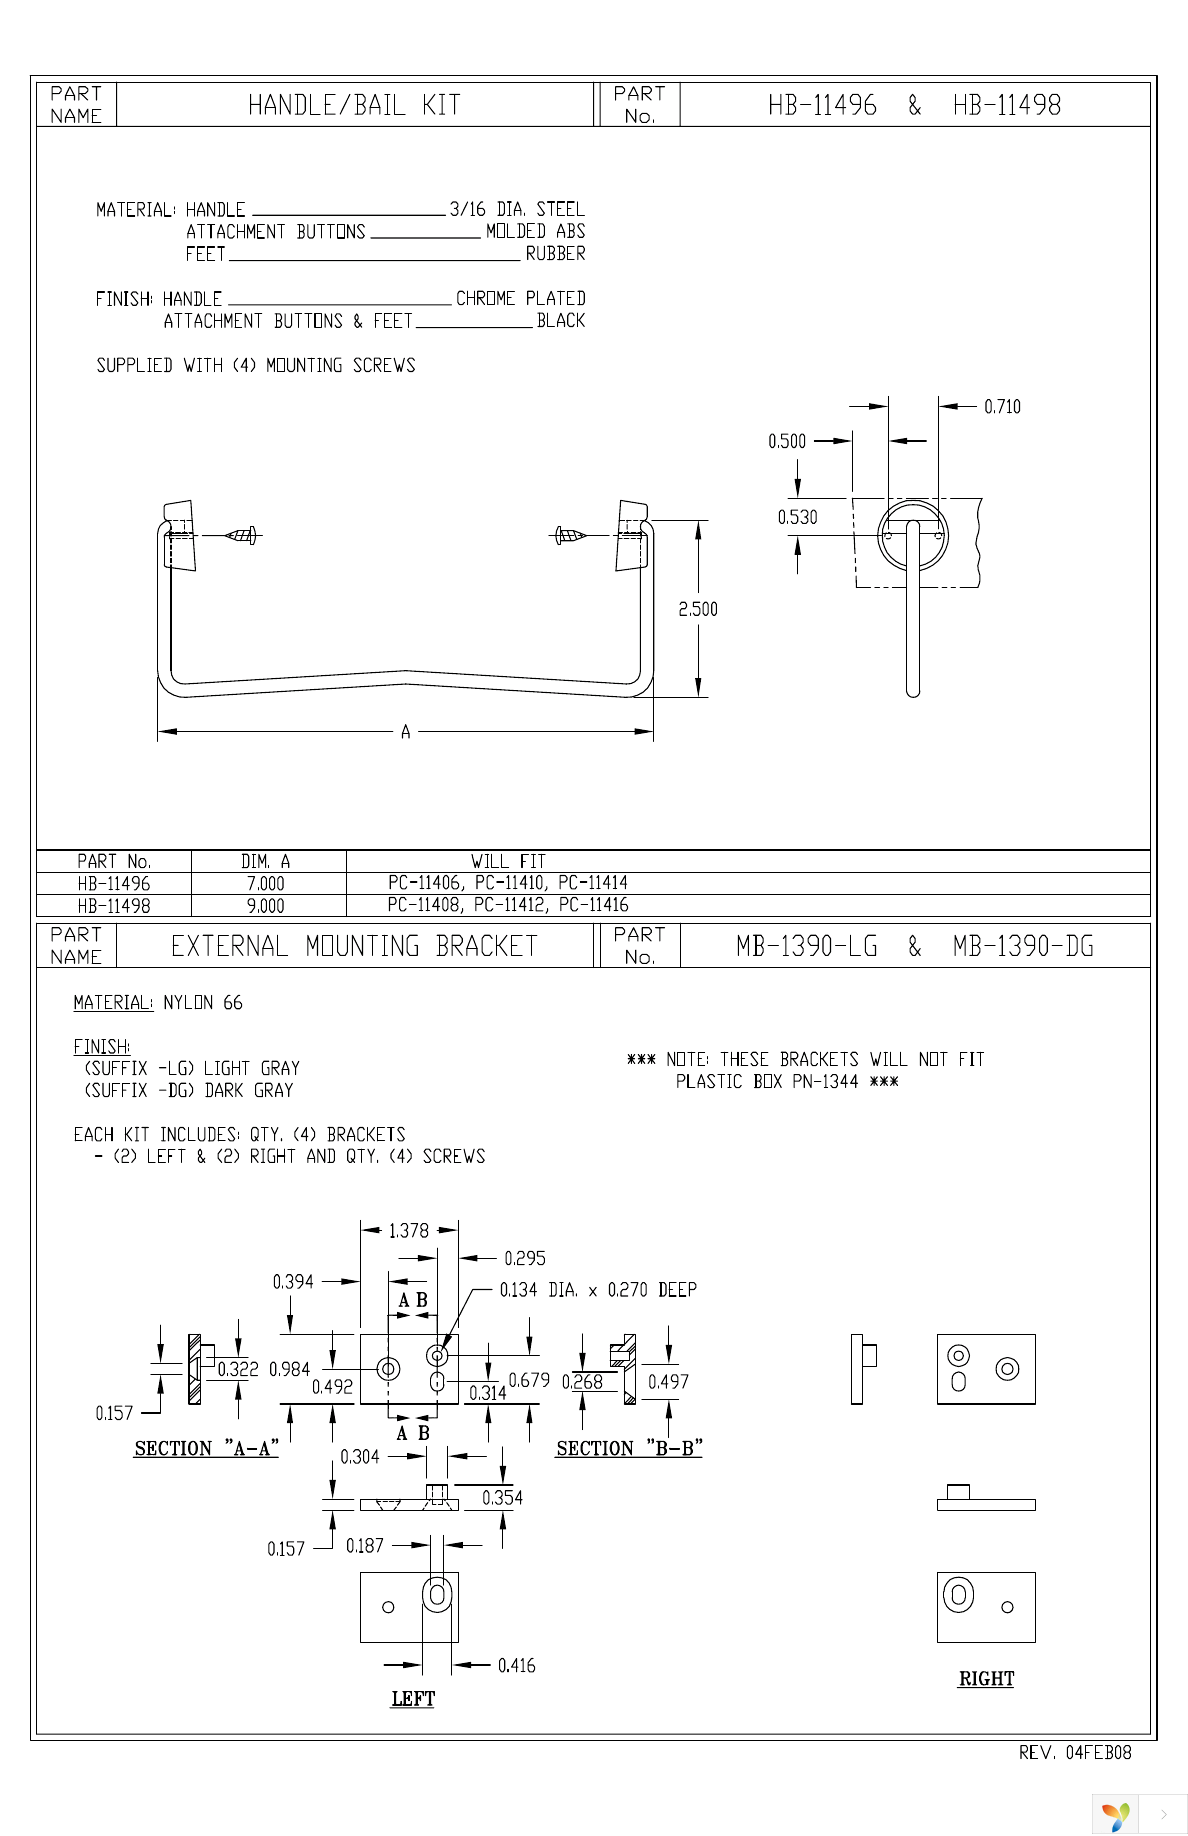 MB-1390-LG Page 1